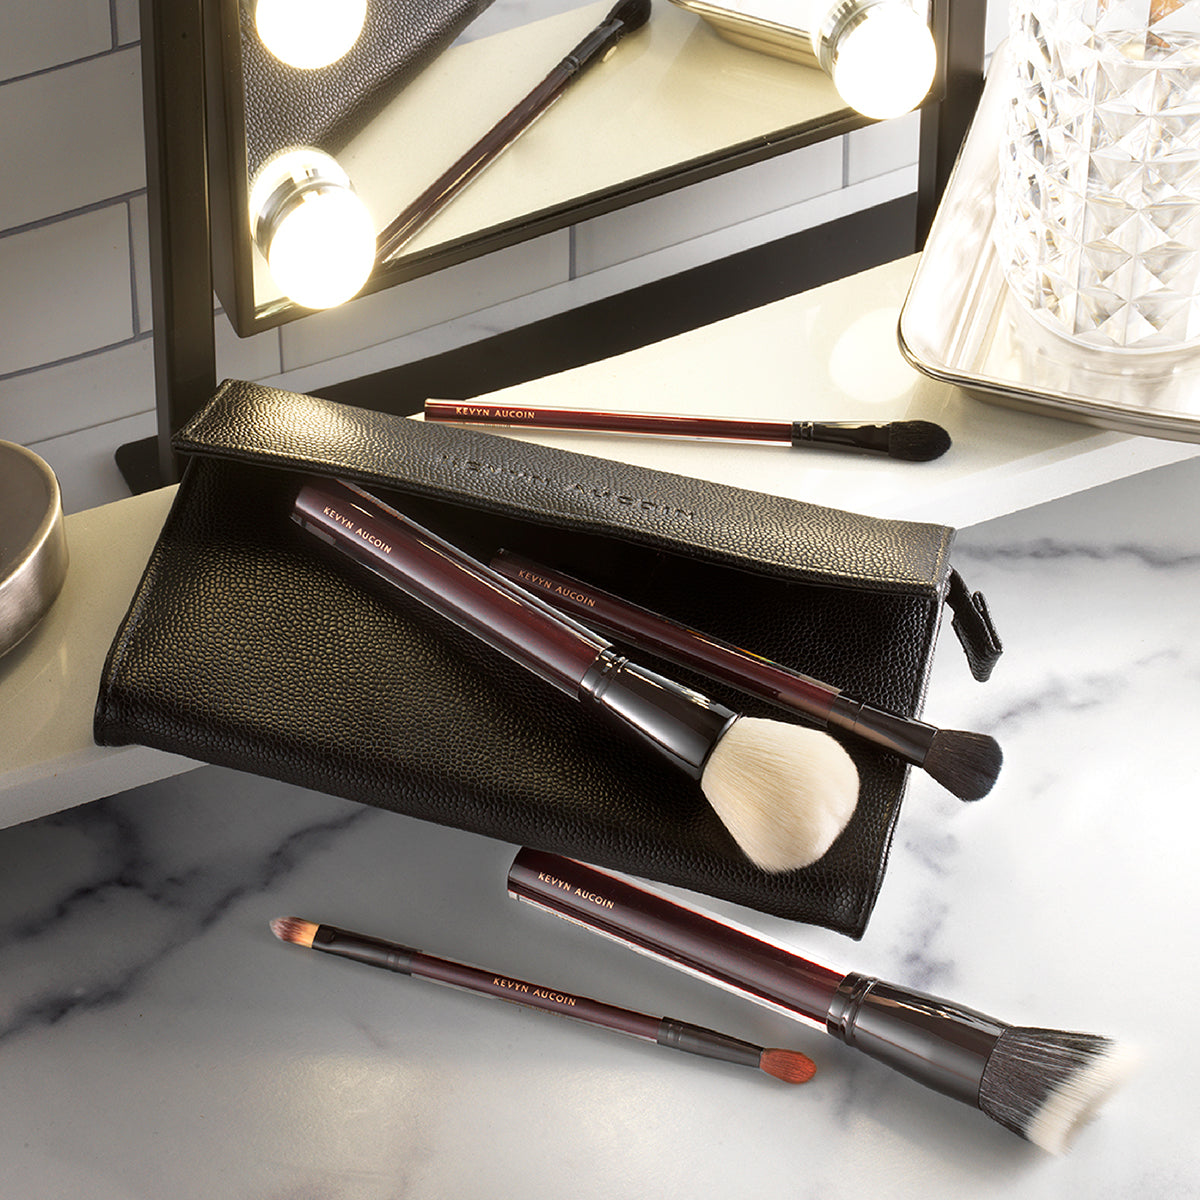 The Iconic Brush Set ($234 Value) – Kevyn Aucoin Beauty